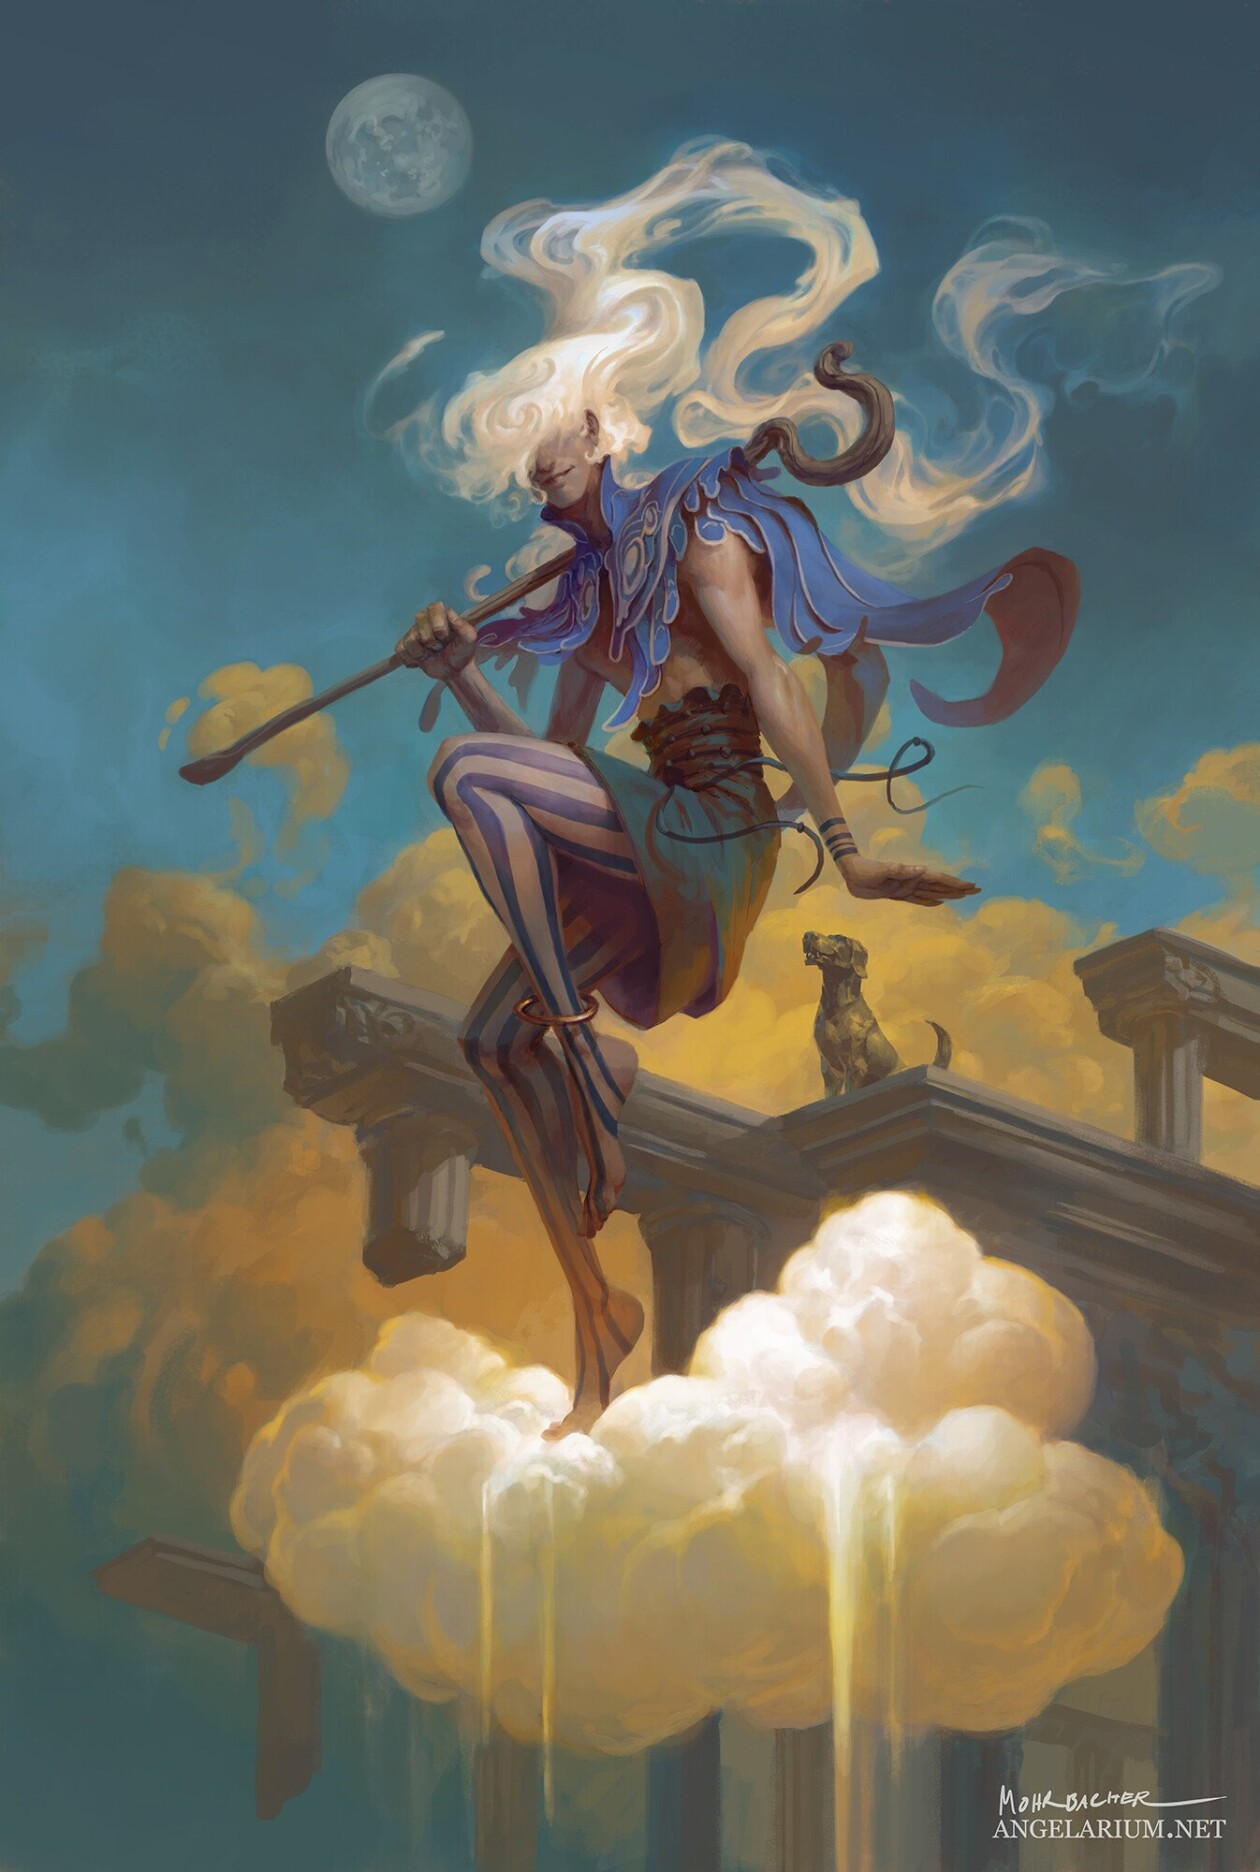 Peter Mohrbacher Blends Surrealism With Fantasy To Create Powerful Magical Beings (12)